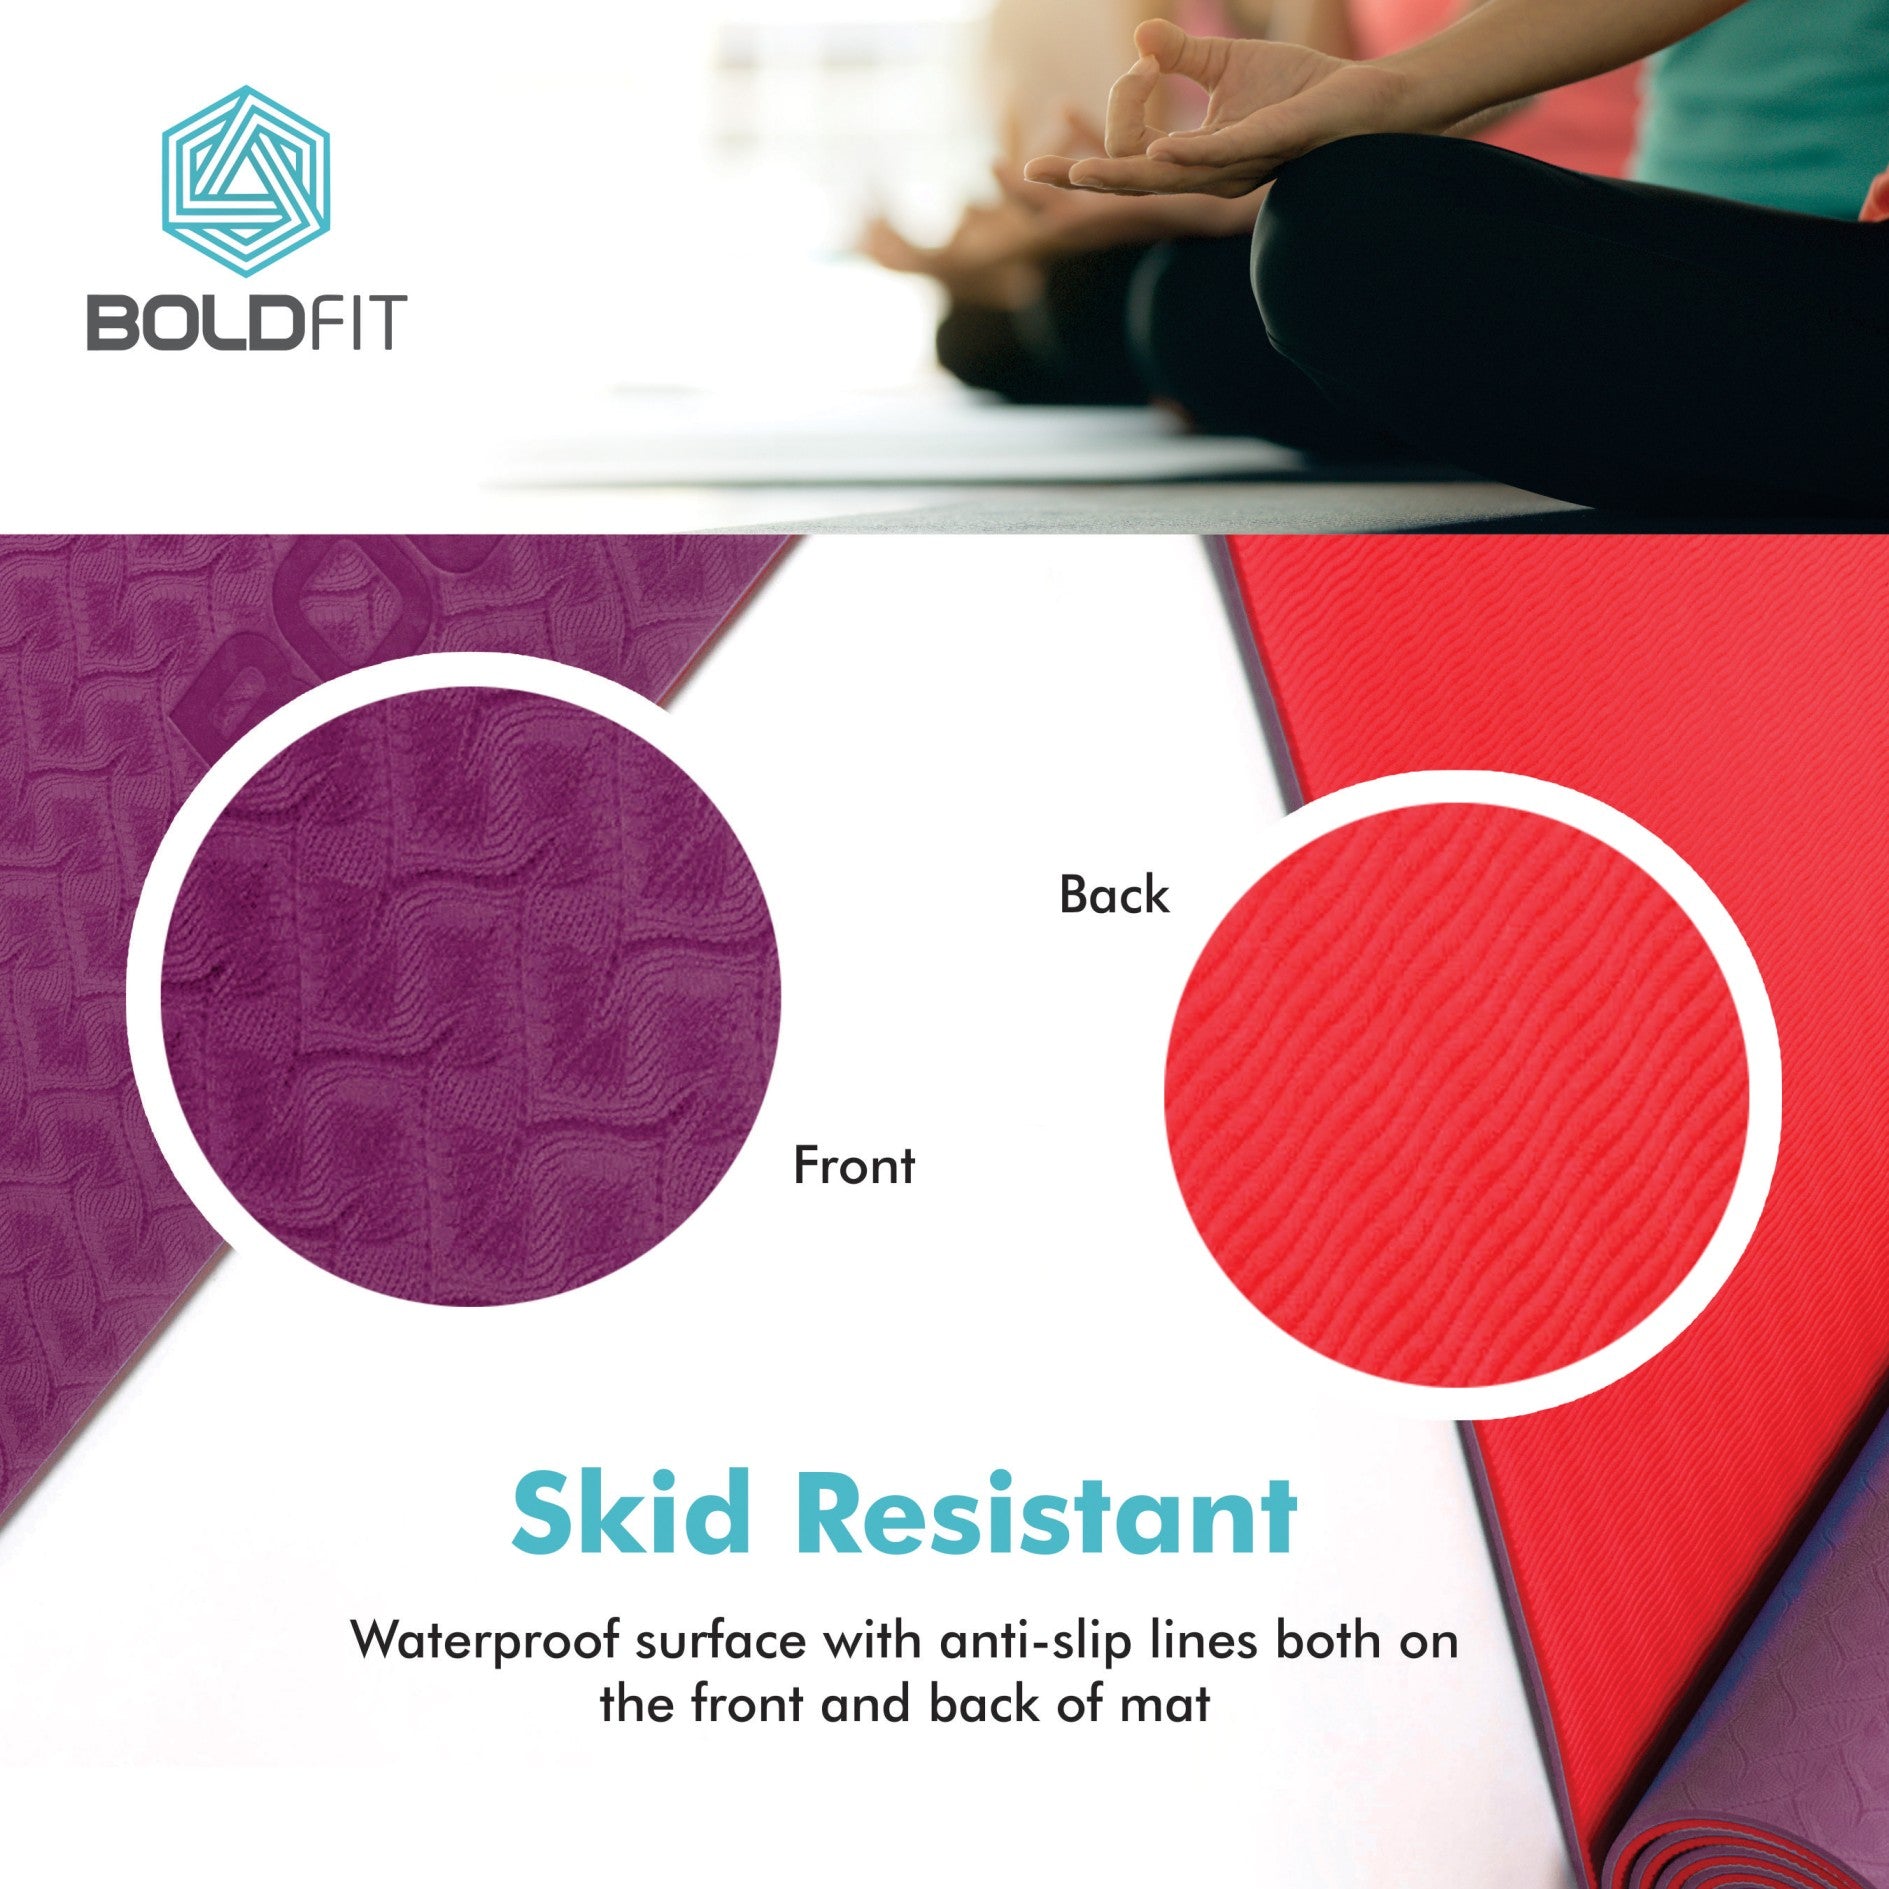 Boldfit Pro-Grip Luxury TPE Yoga mat with Carrying Bag